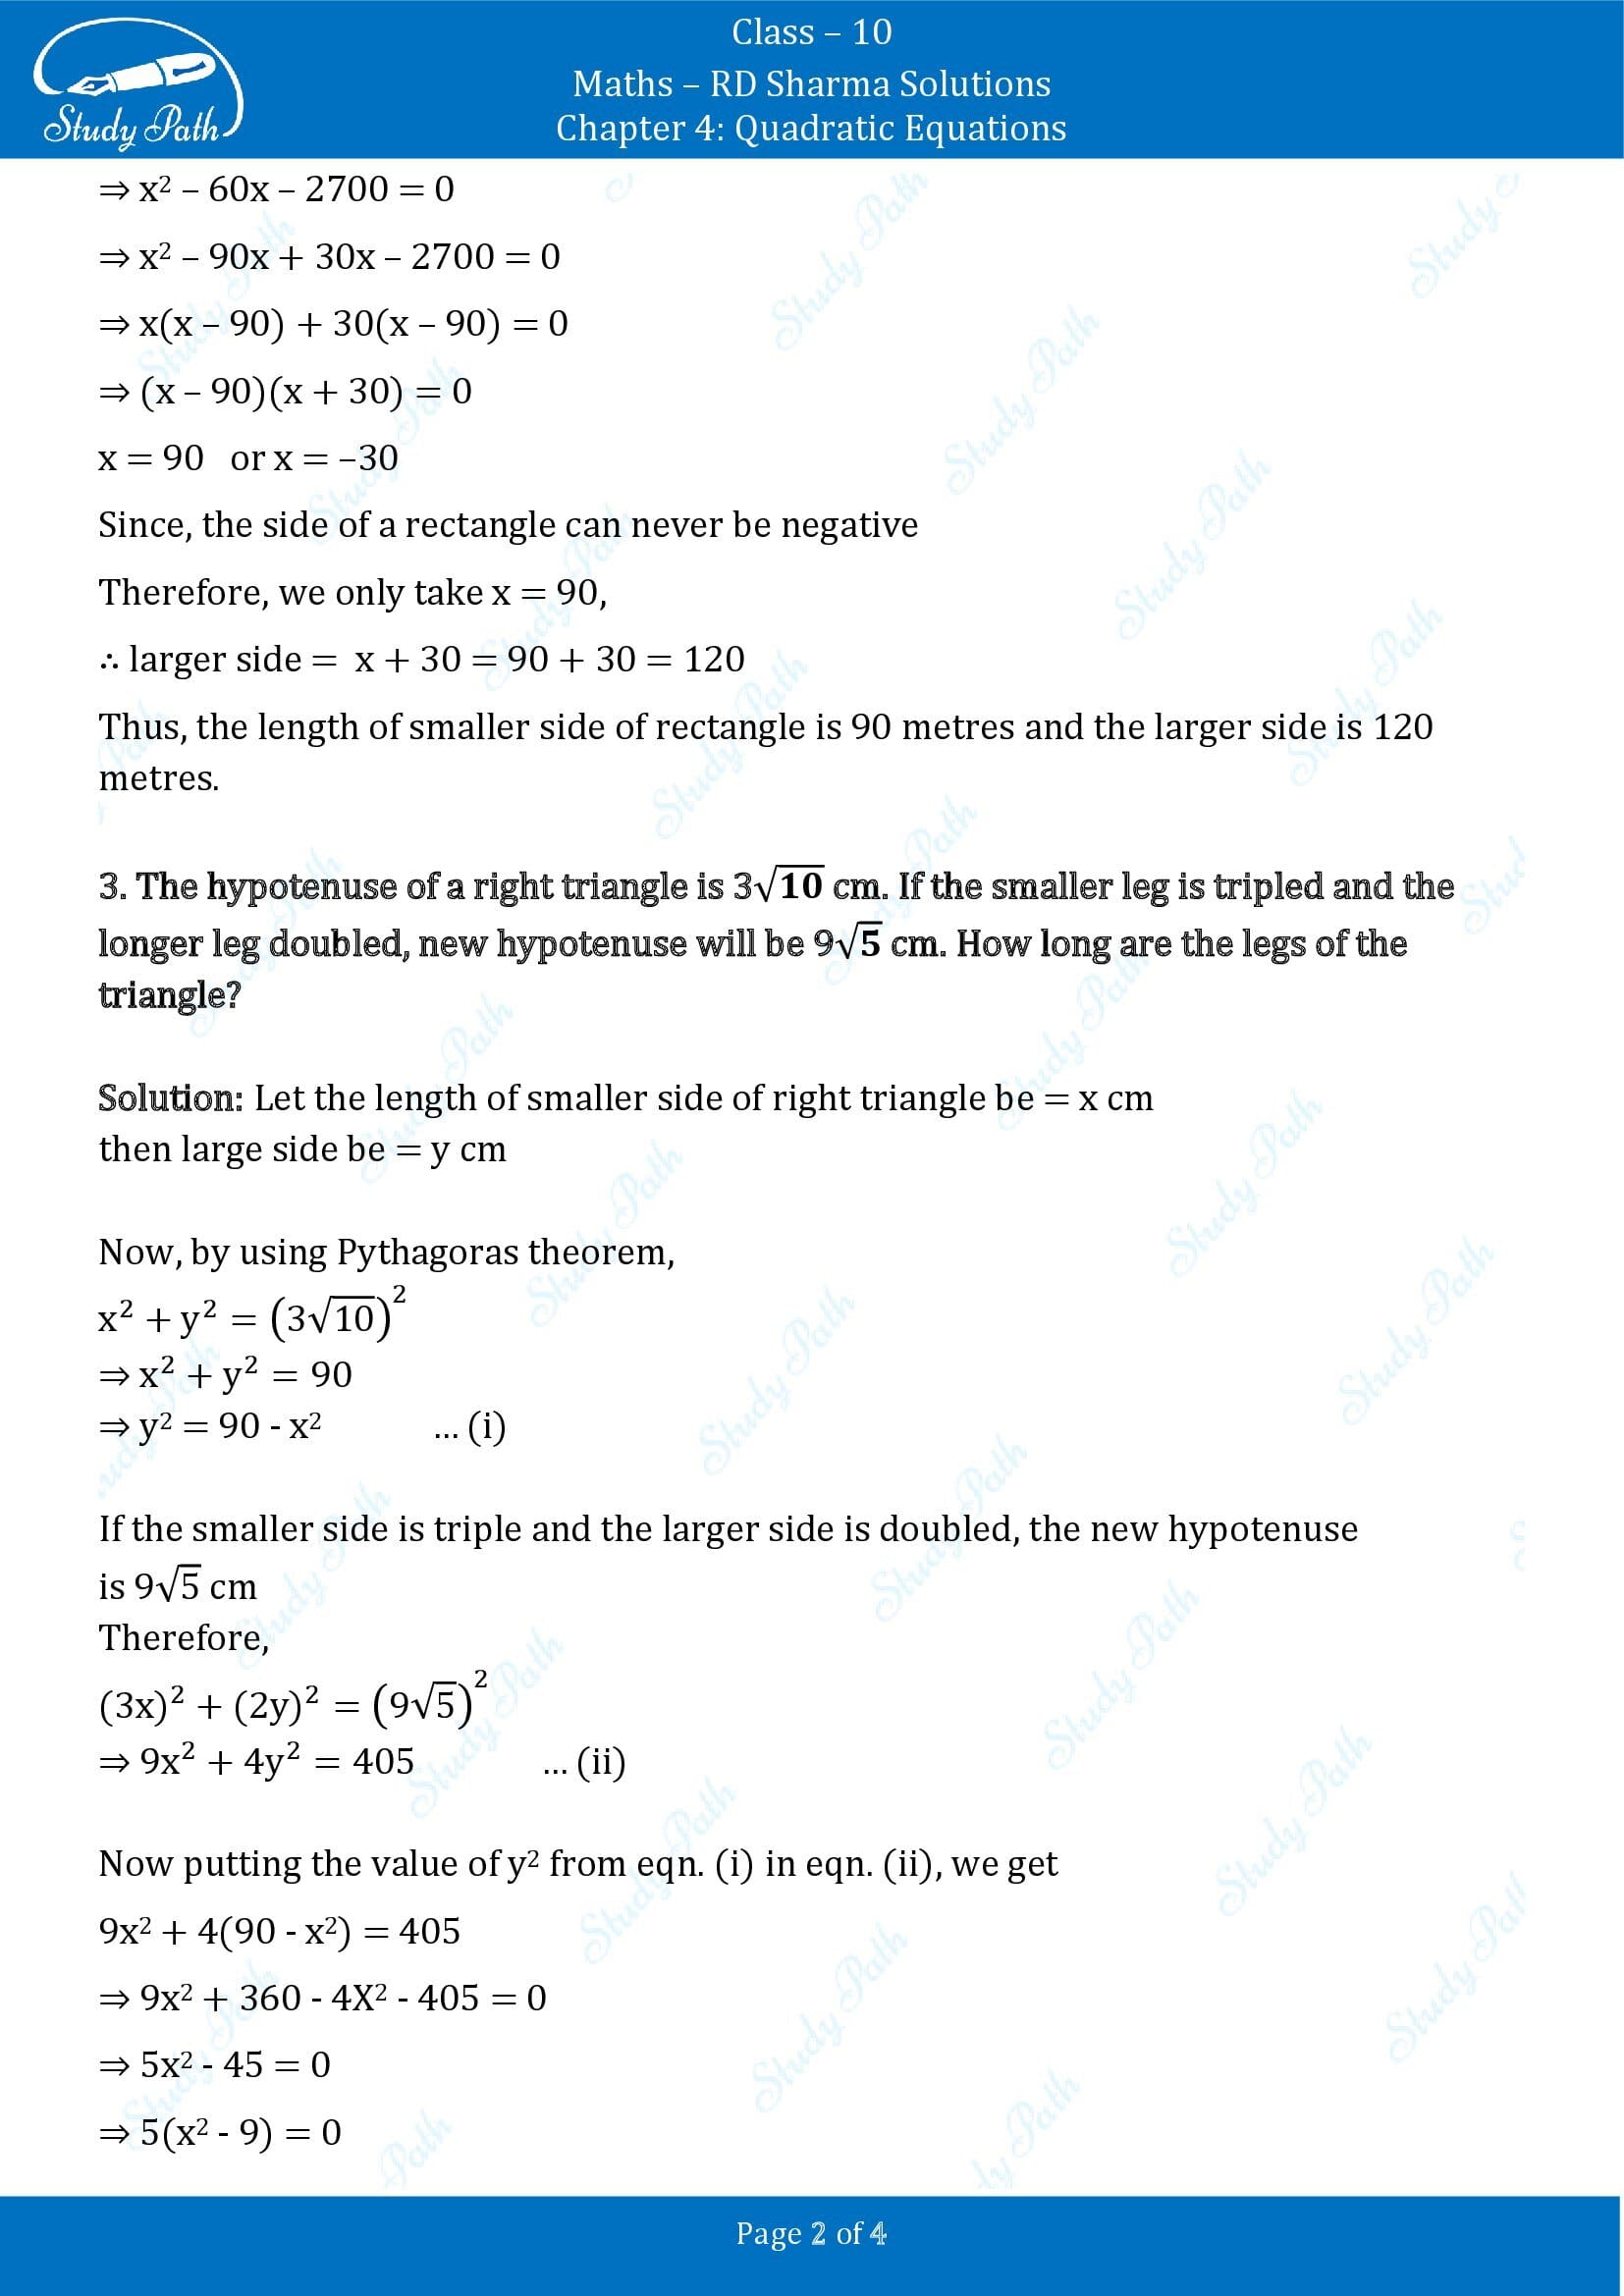 RD Sharma Solutions Class 10 Chapter 4 Quadratic Equations Exercise 4.10 00002